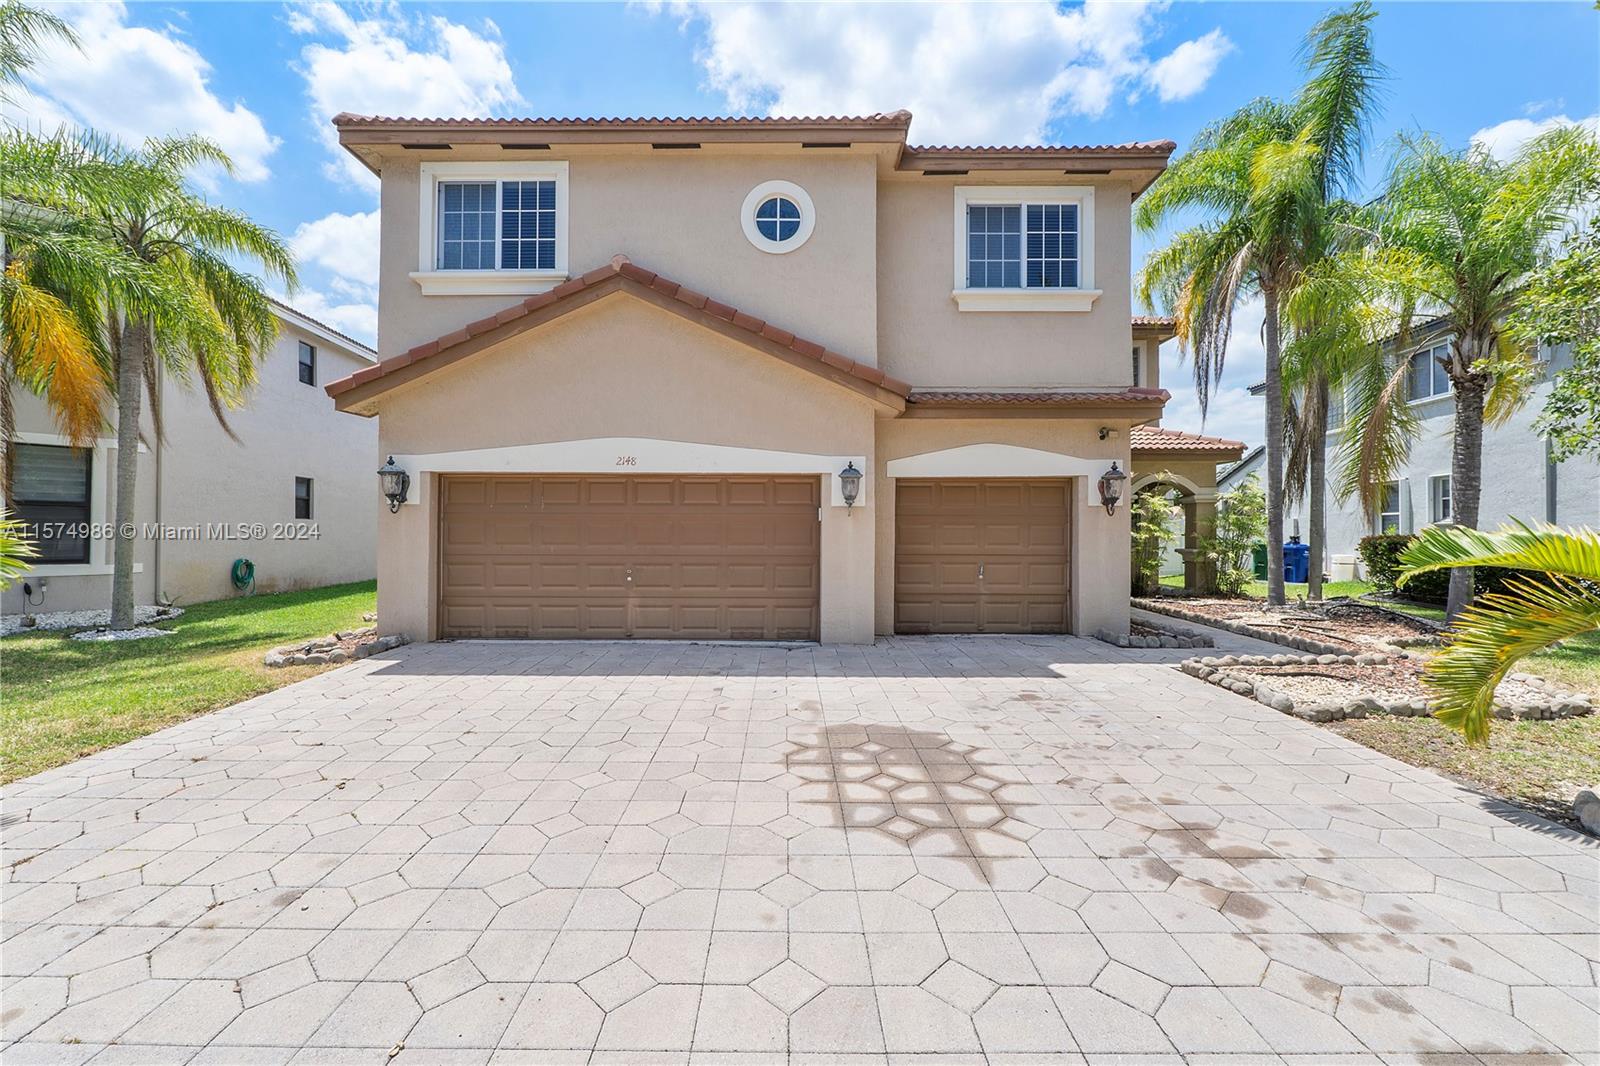 Property for Sale at 2148 Sw 176th Ter, Miramar, Broward County, Florida - Bedrooms: 6 
Bathrooms: 4  - $875,000